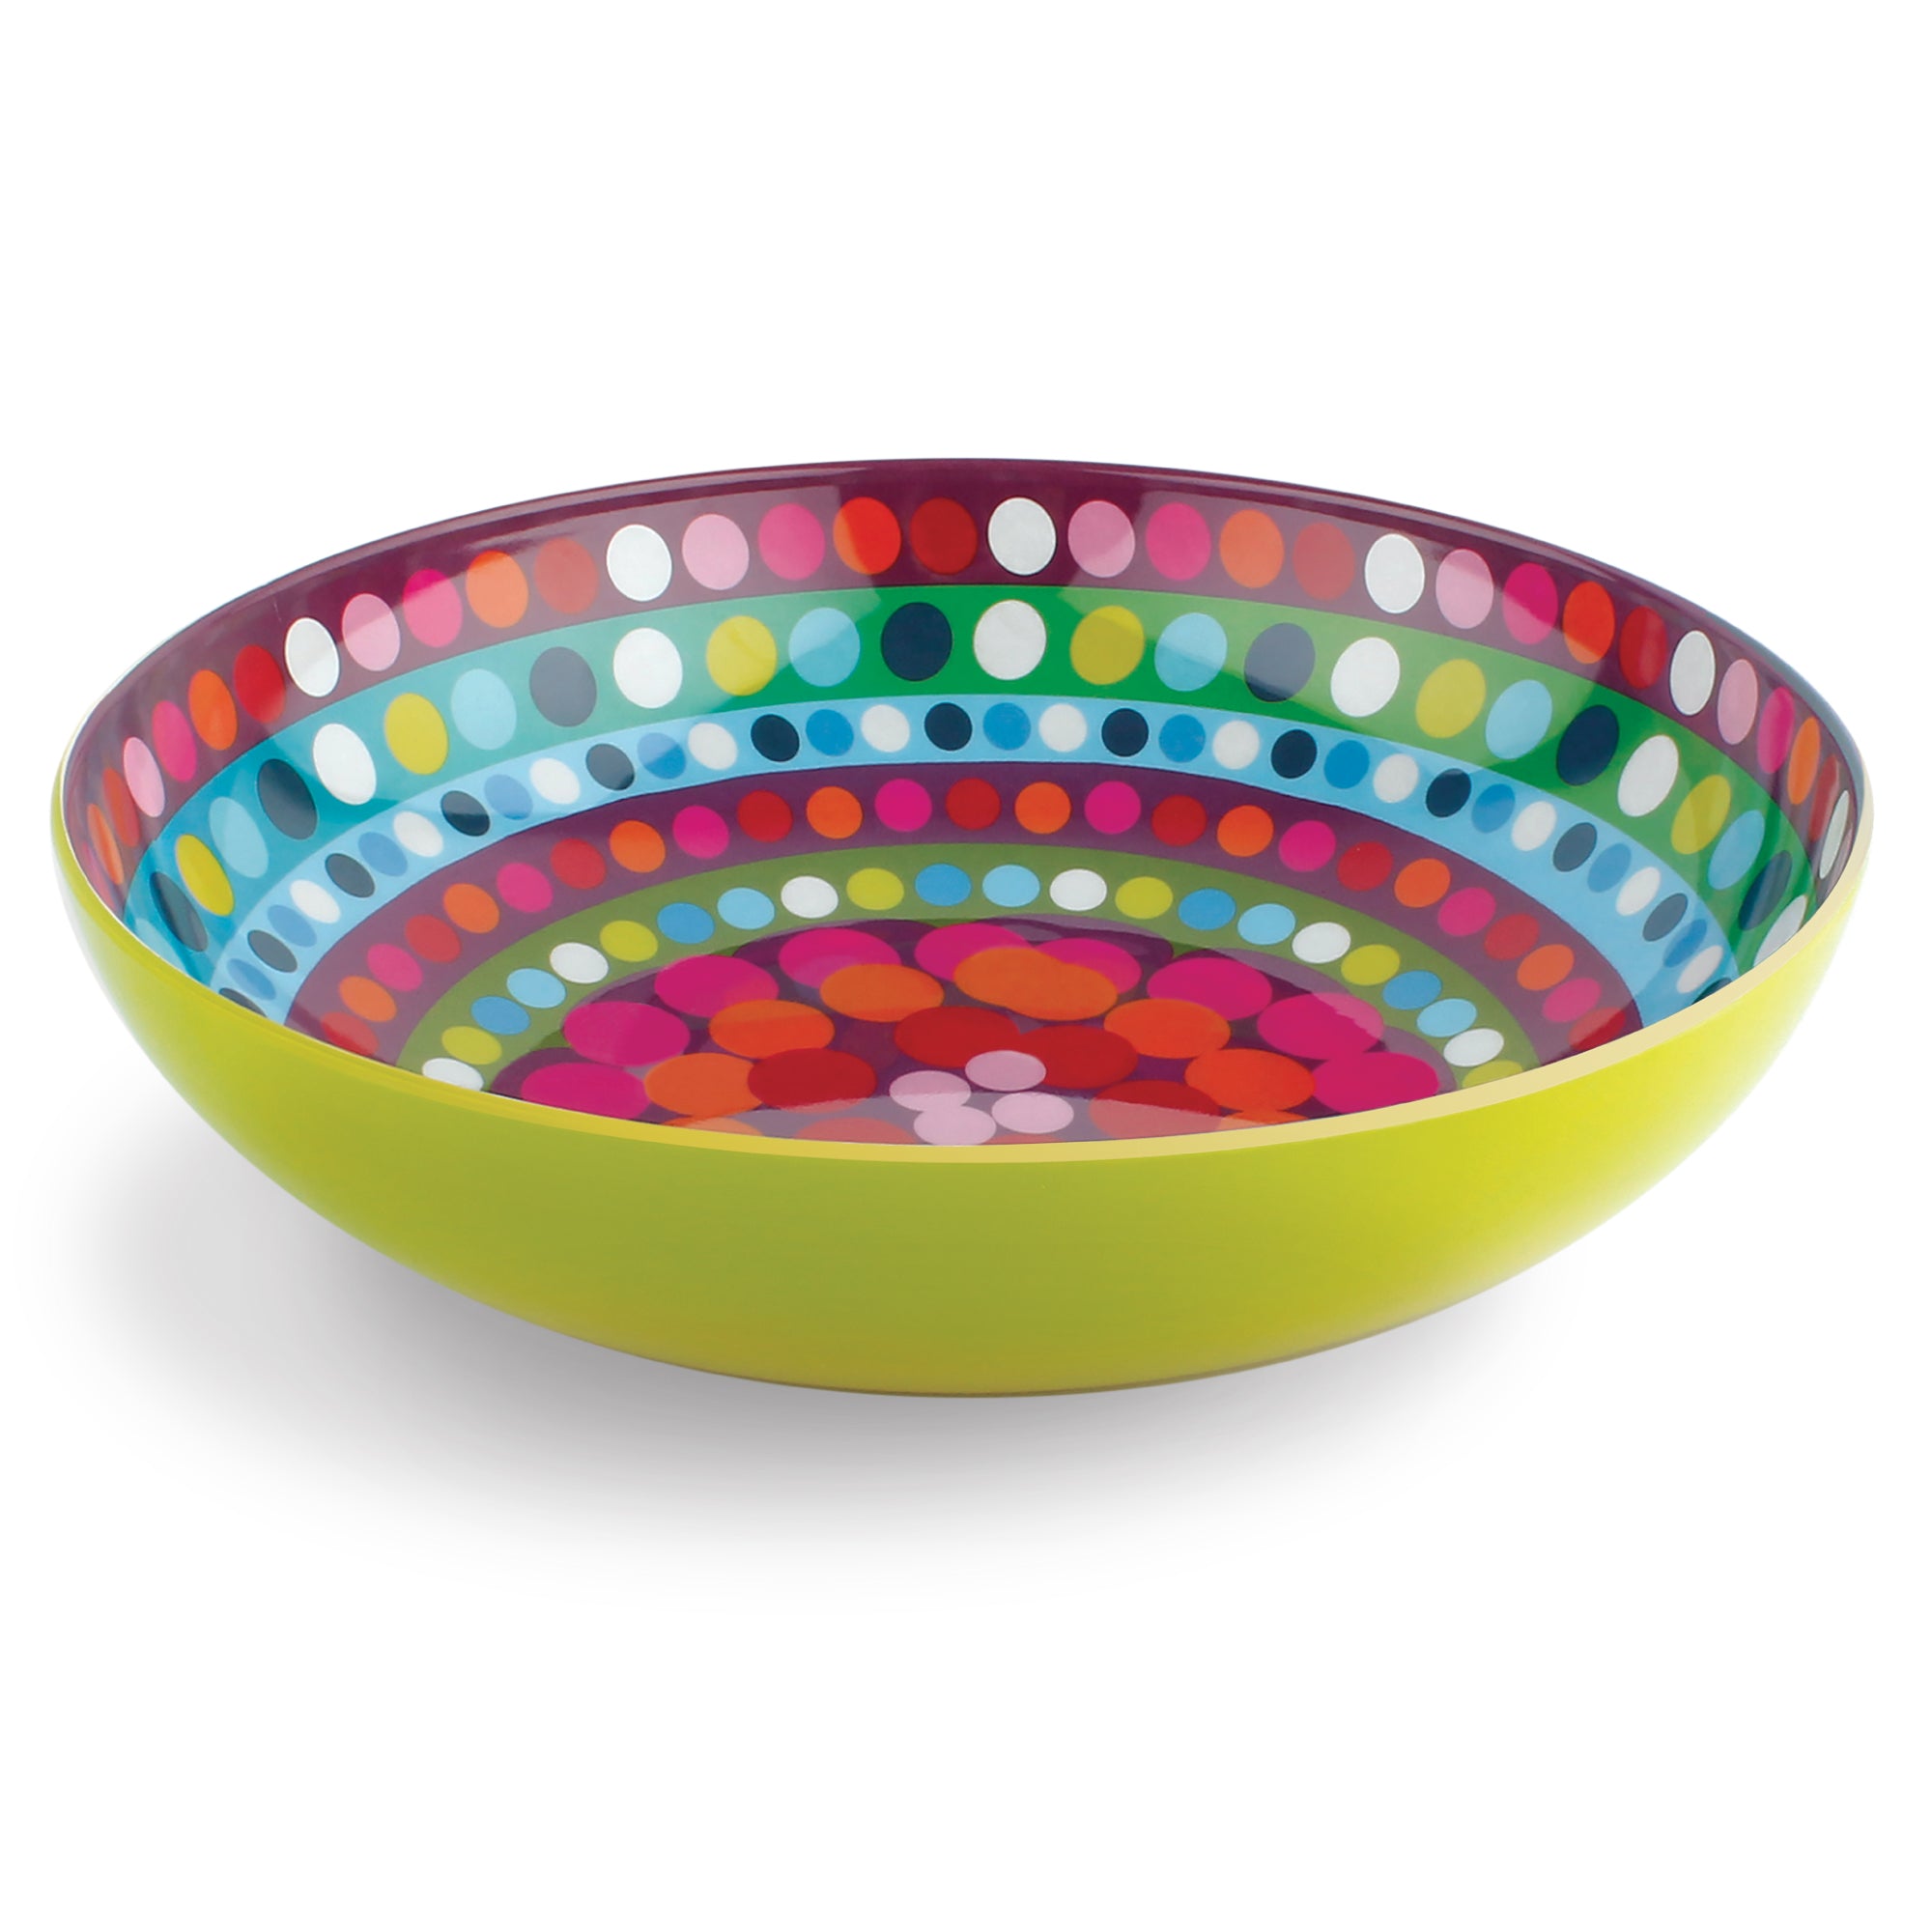 Dining, New Solo Bowls Insulated Melamine